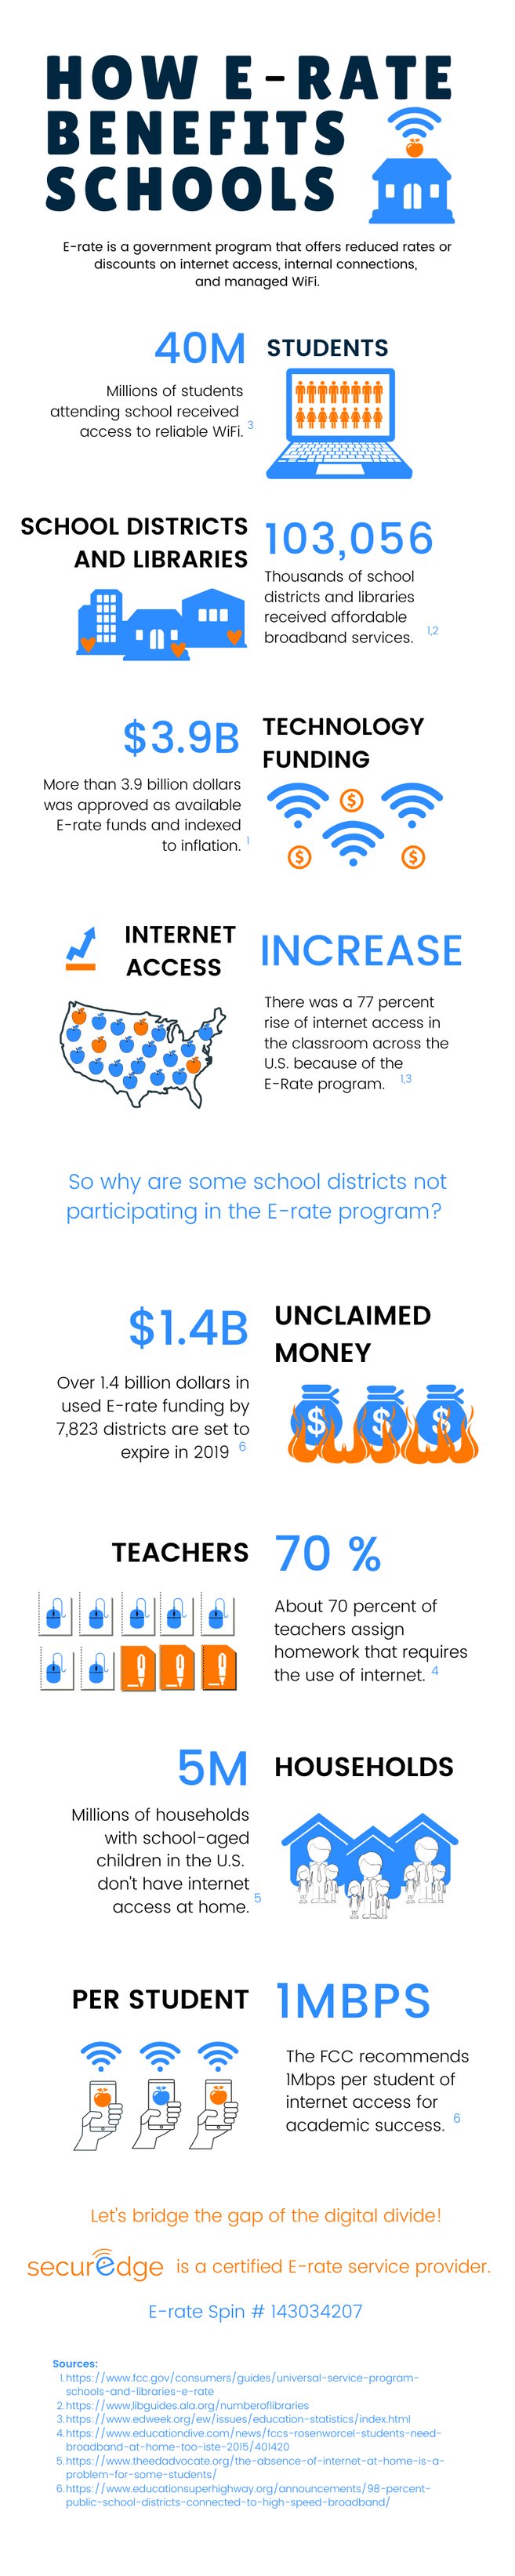 E-Rate InfoGraphic2